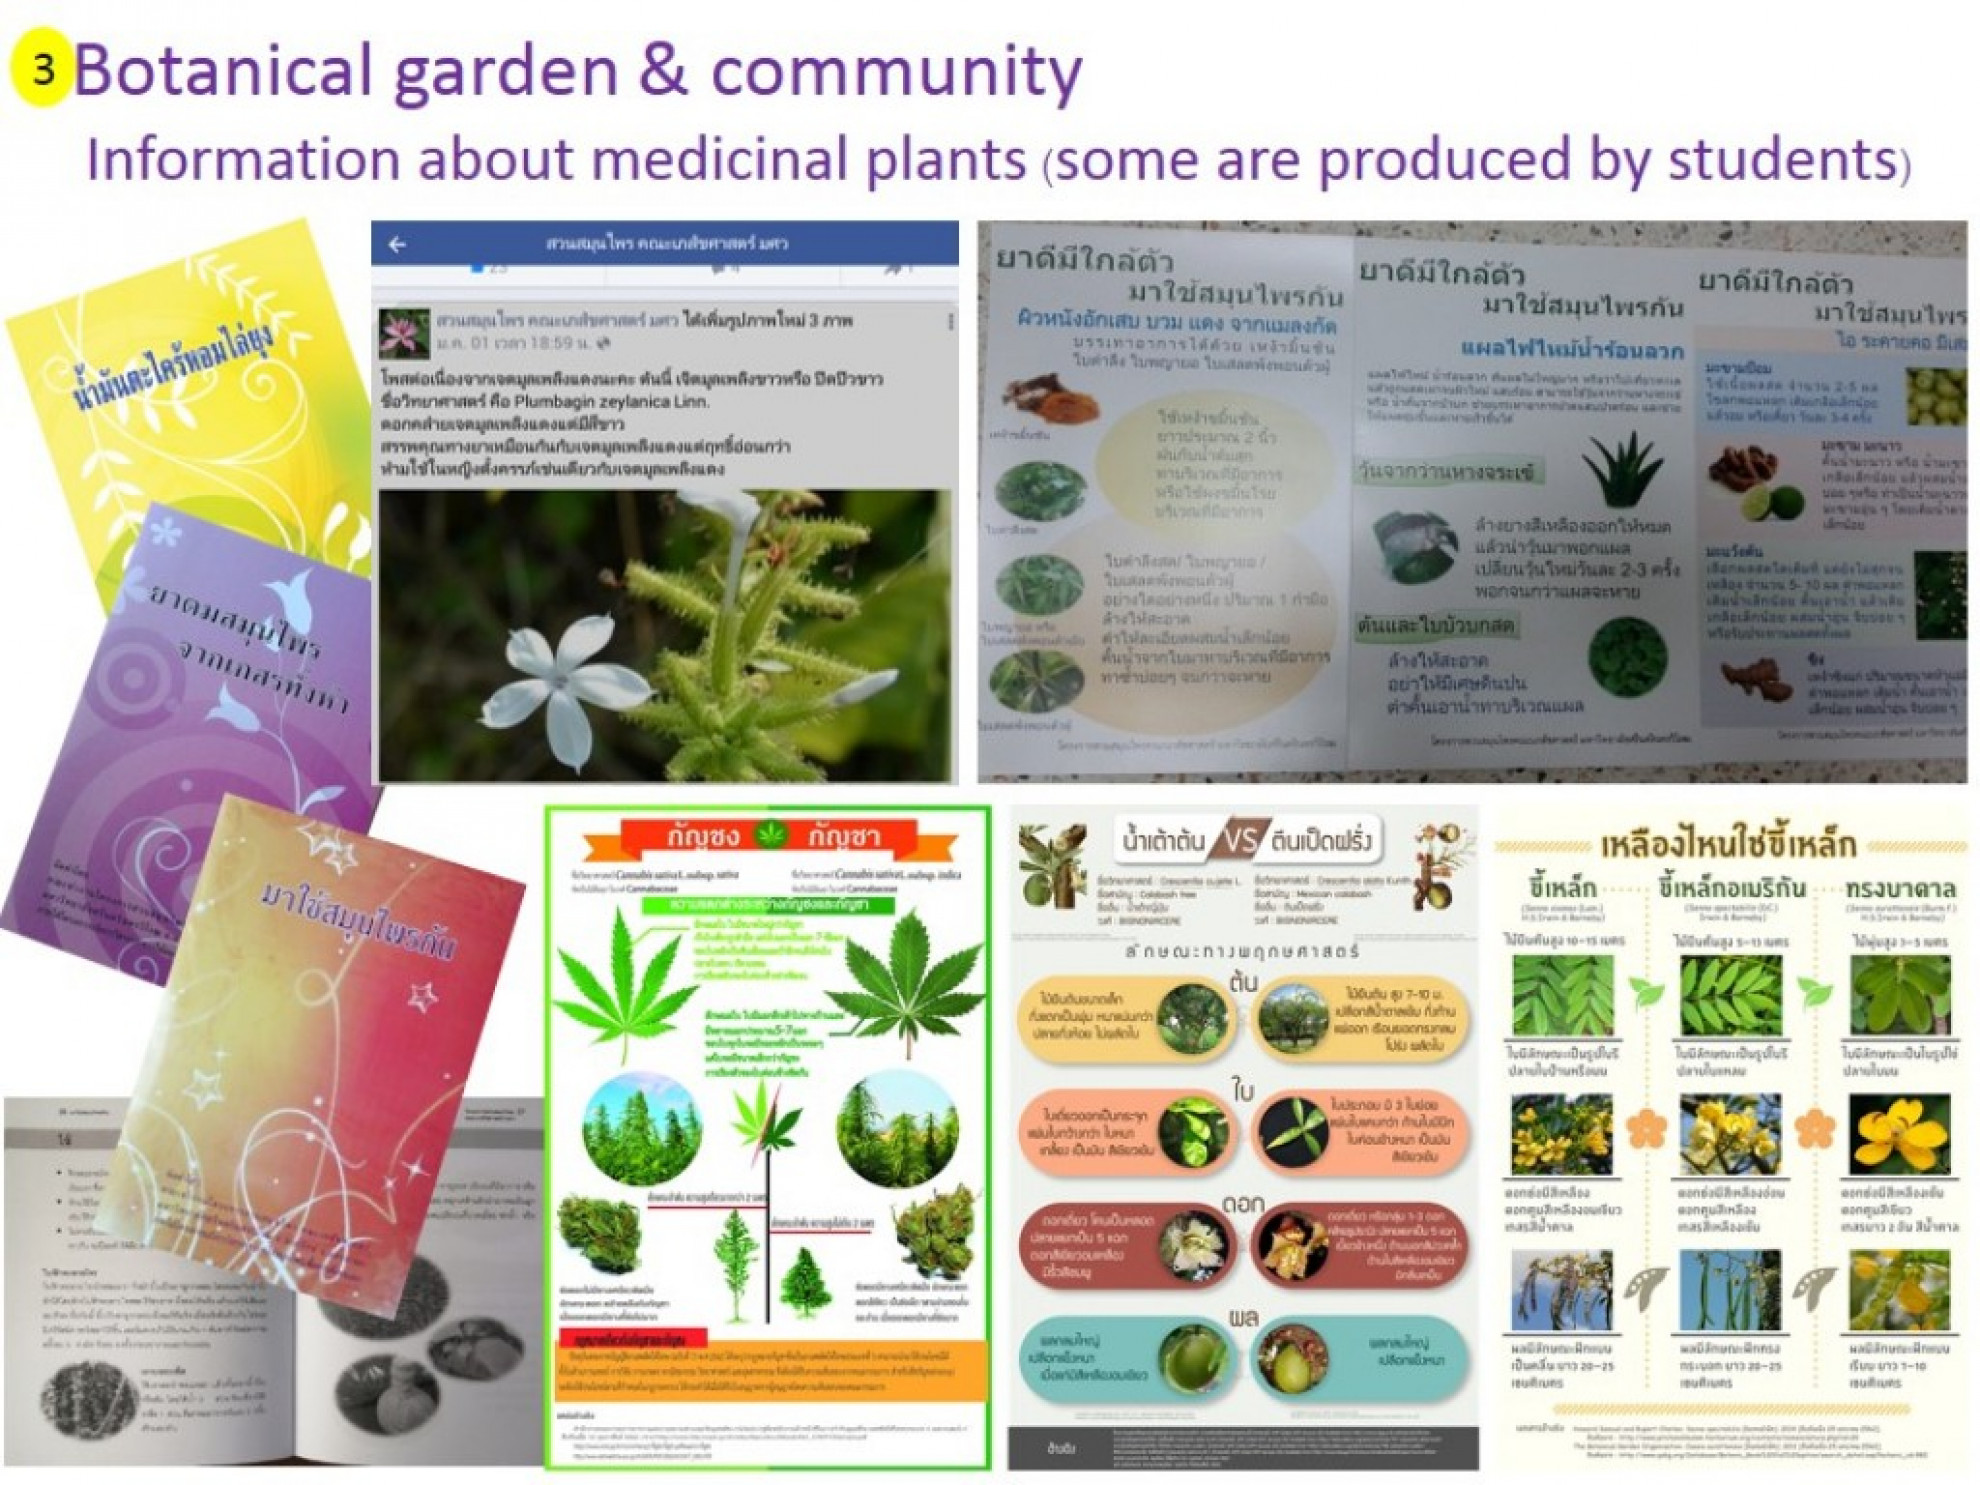 Information about medicinal plants (some are produced by students)